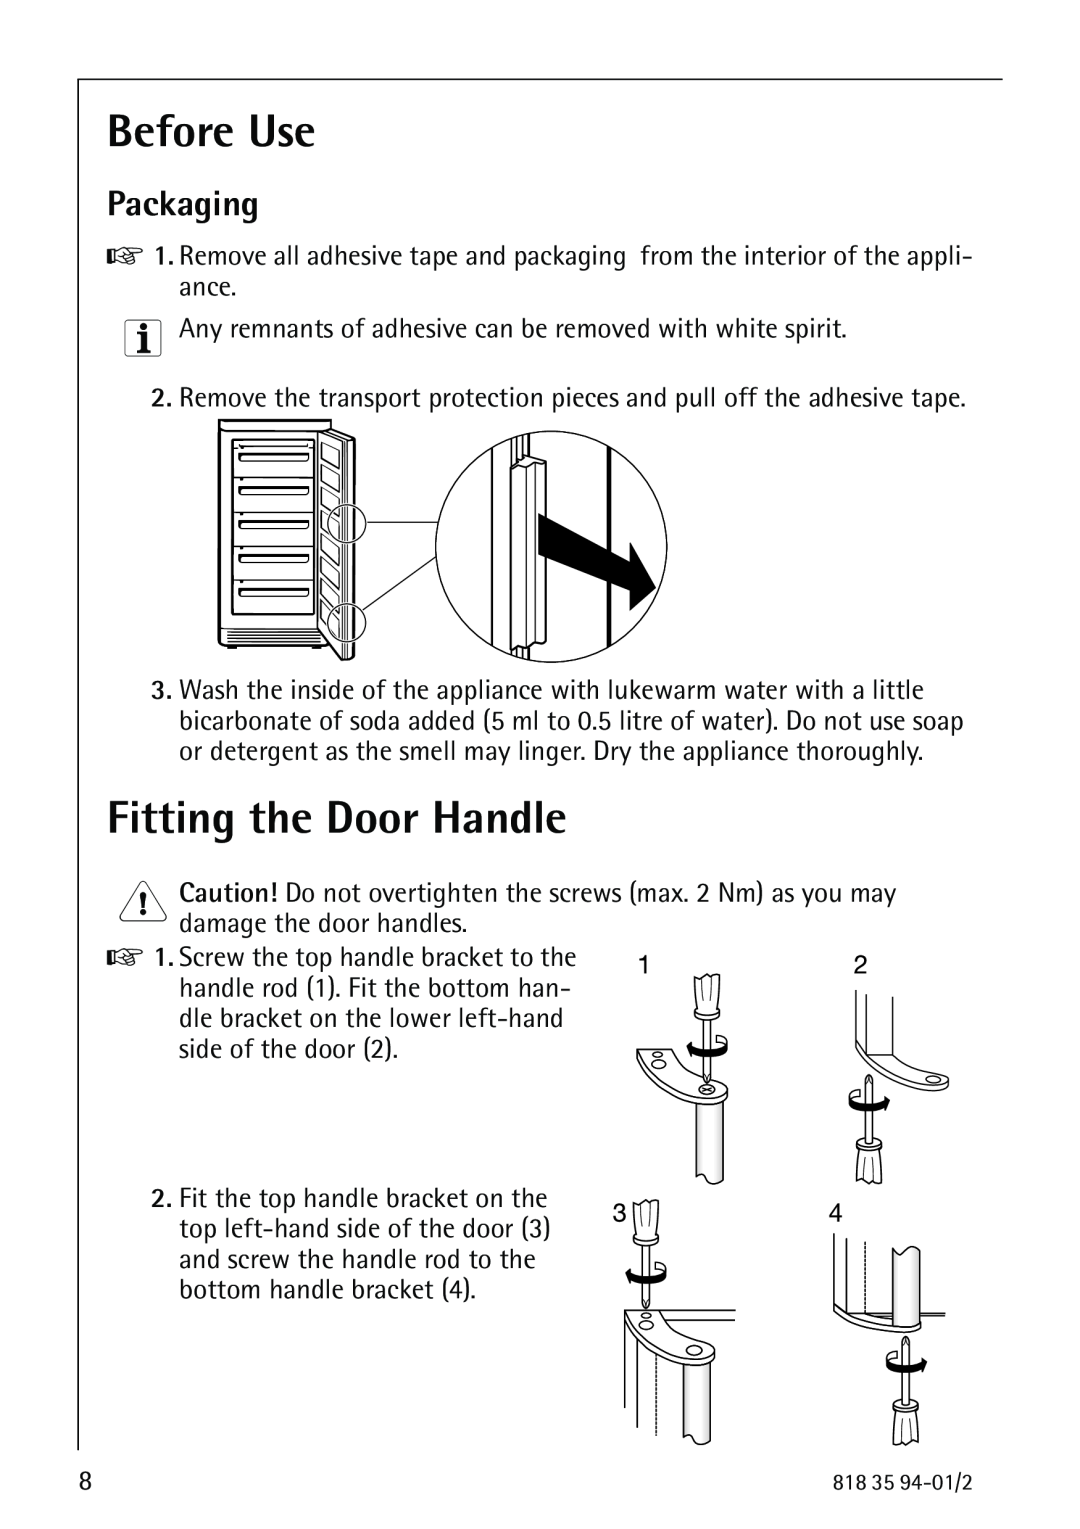 Electrolux U31462 operating instructions Before Use, Fitting the Door Handle, Packaging 